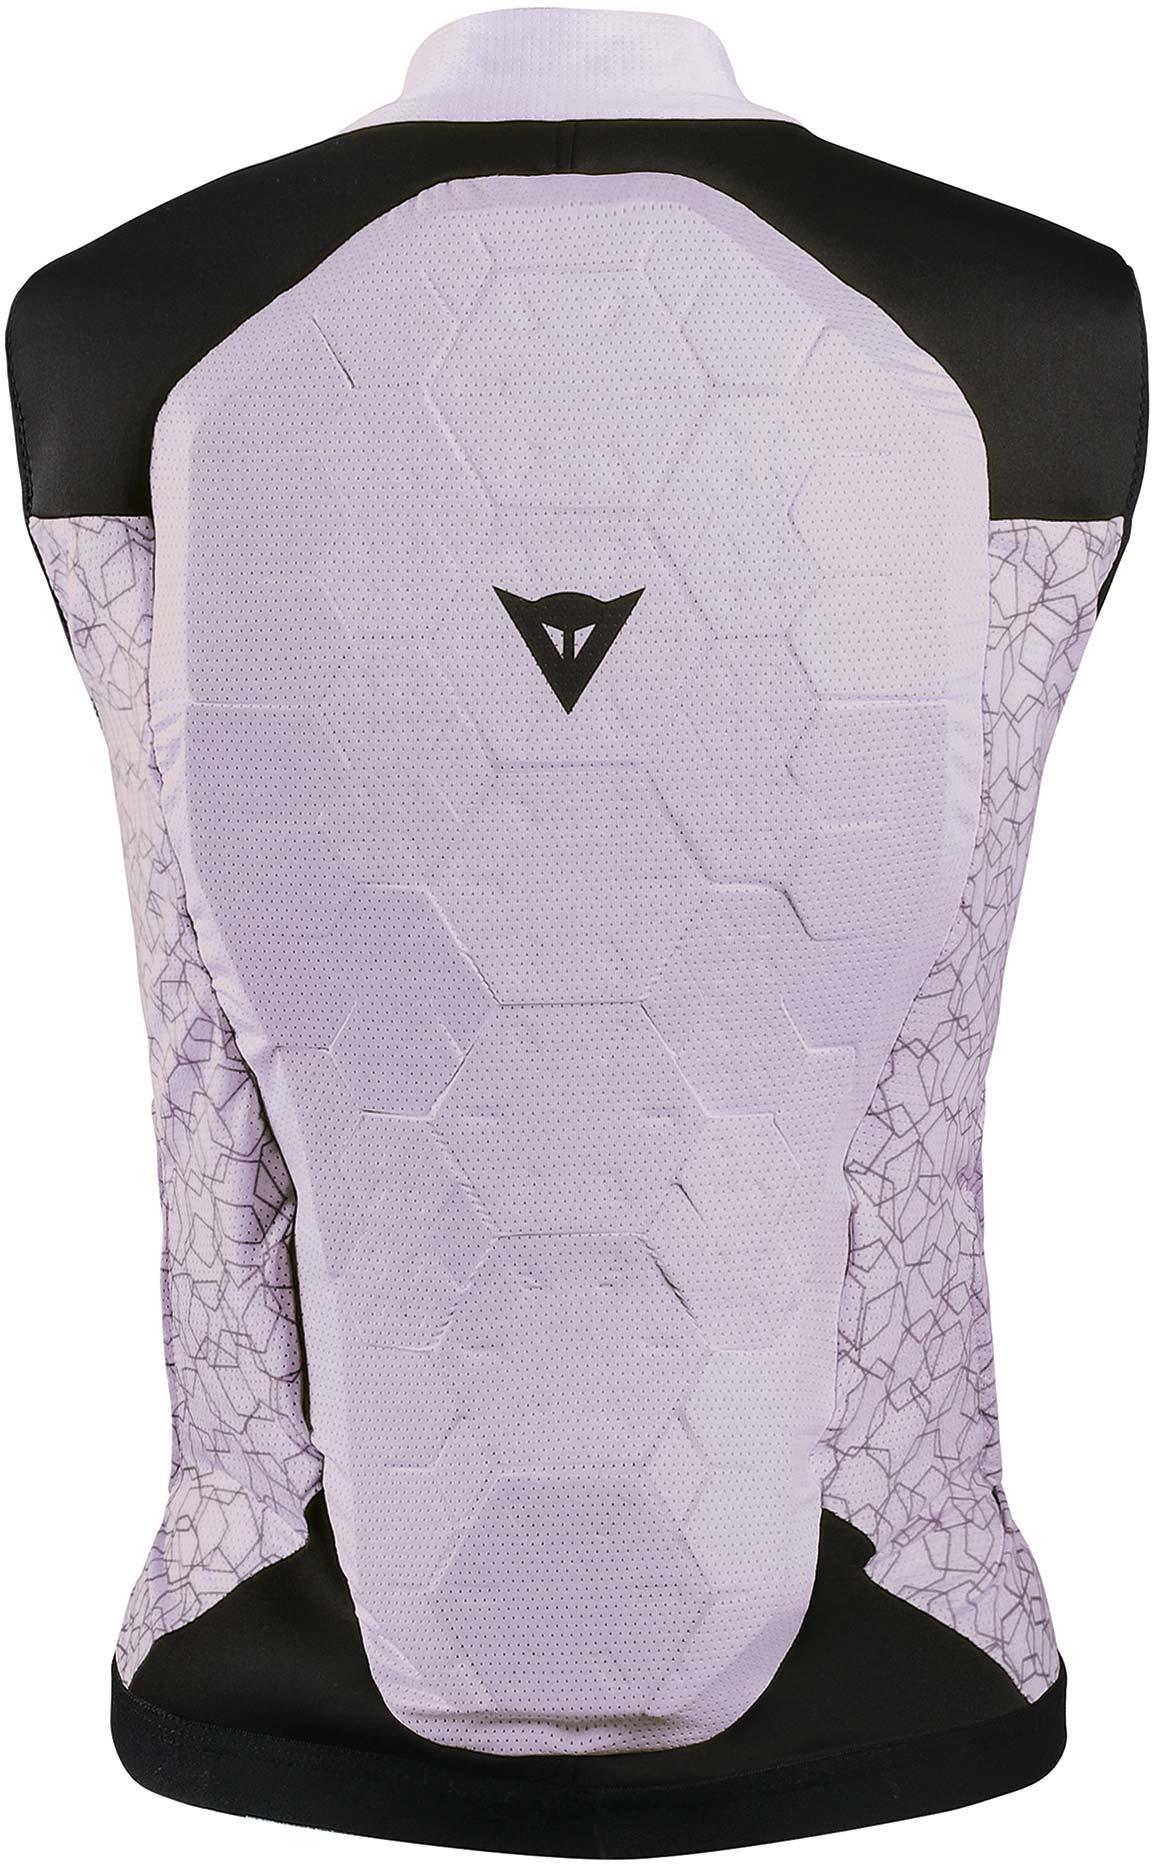 Women’s vest with protector